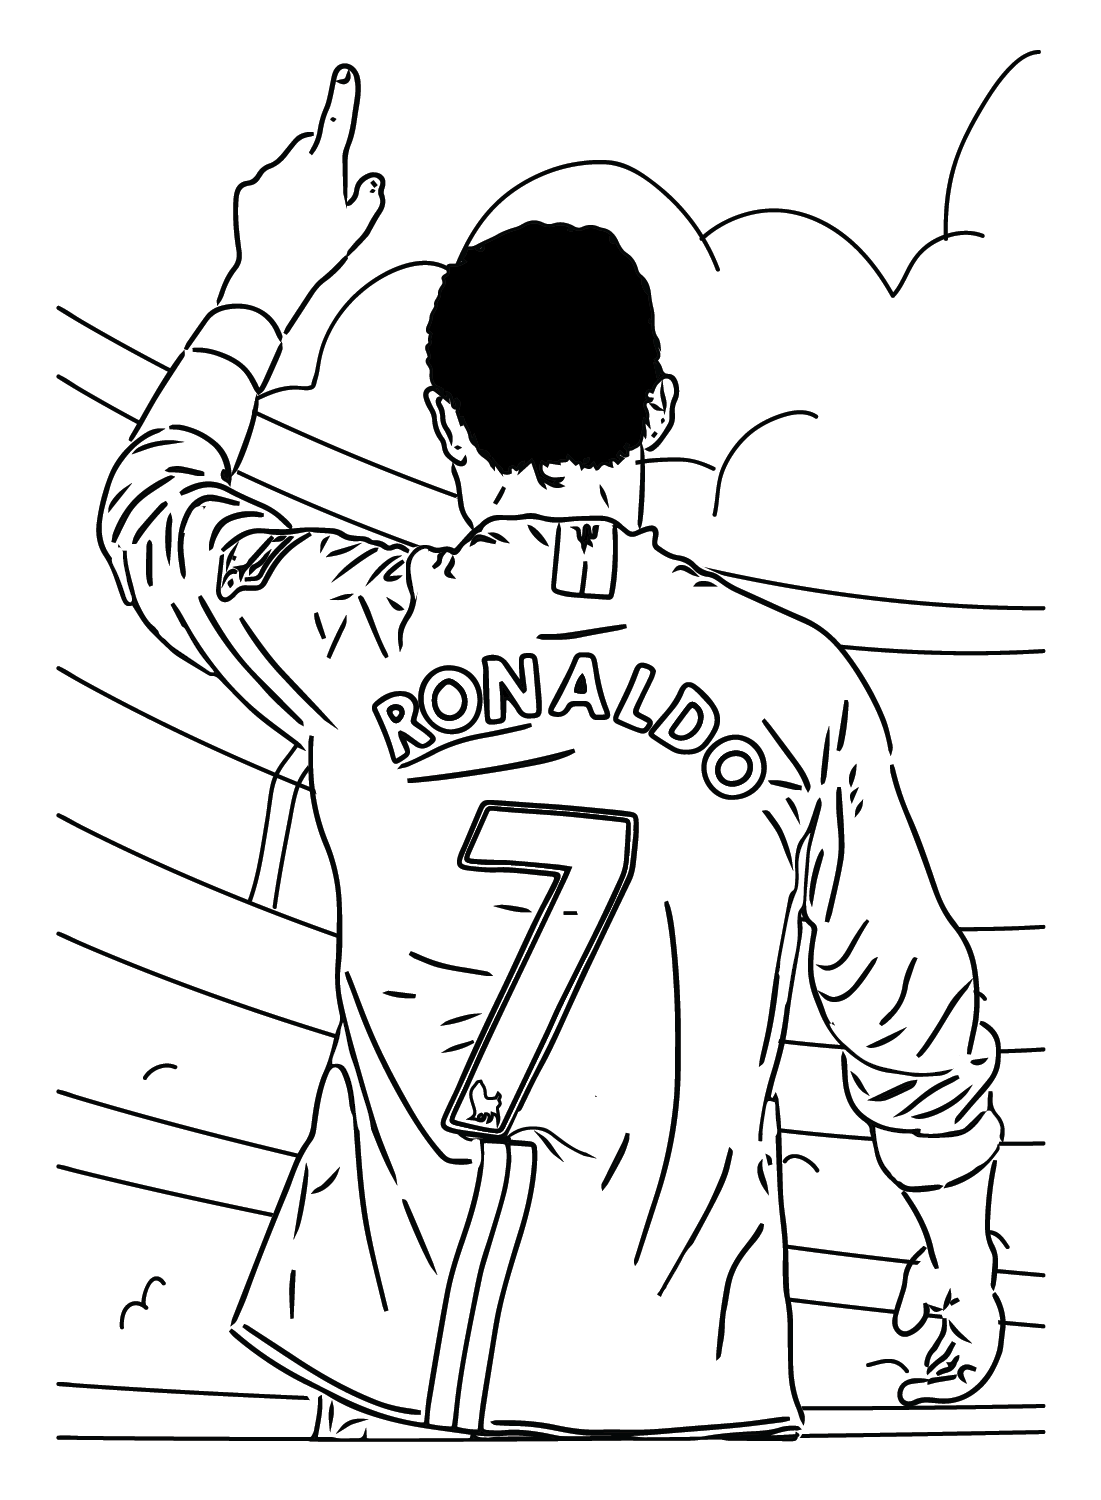 Cristiano Ronaldo Coloring Pages Printable for Free Download